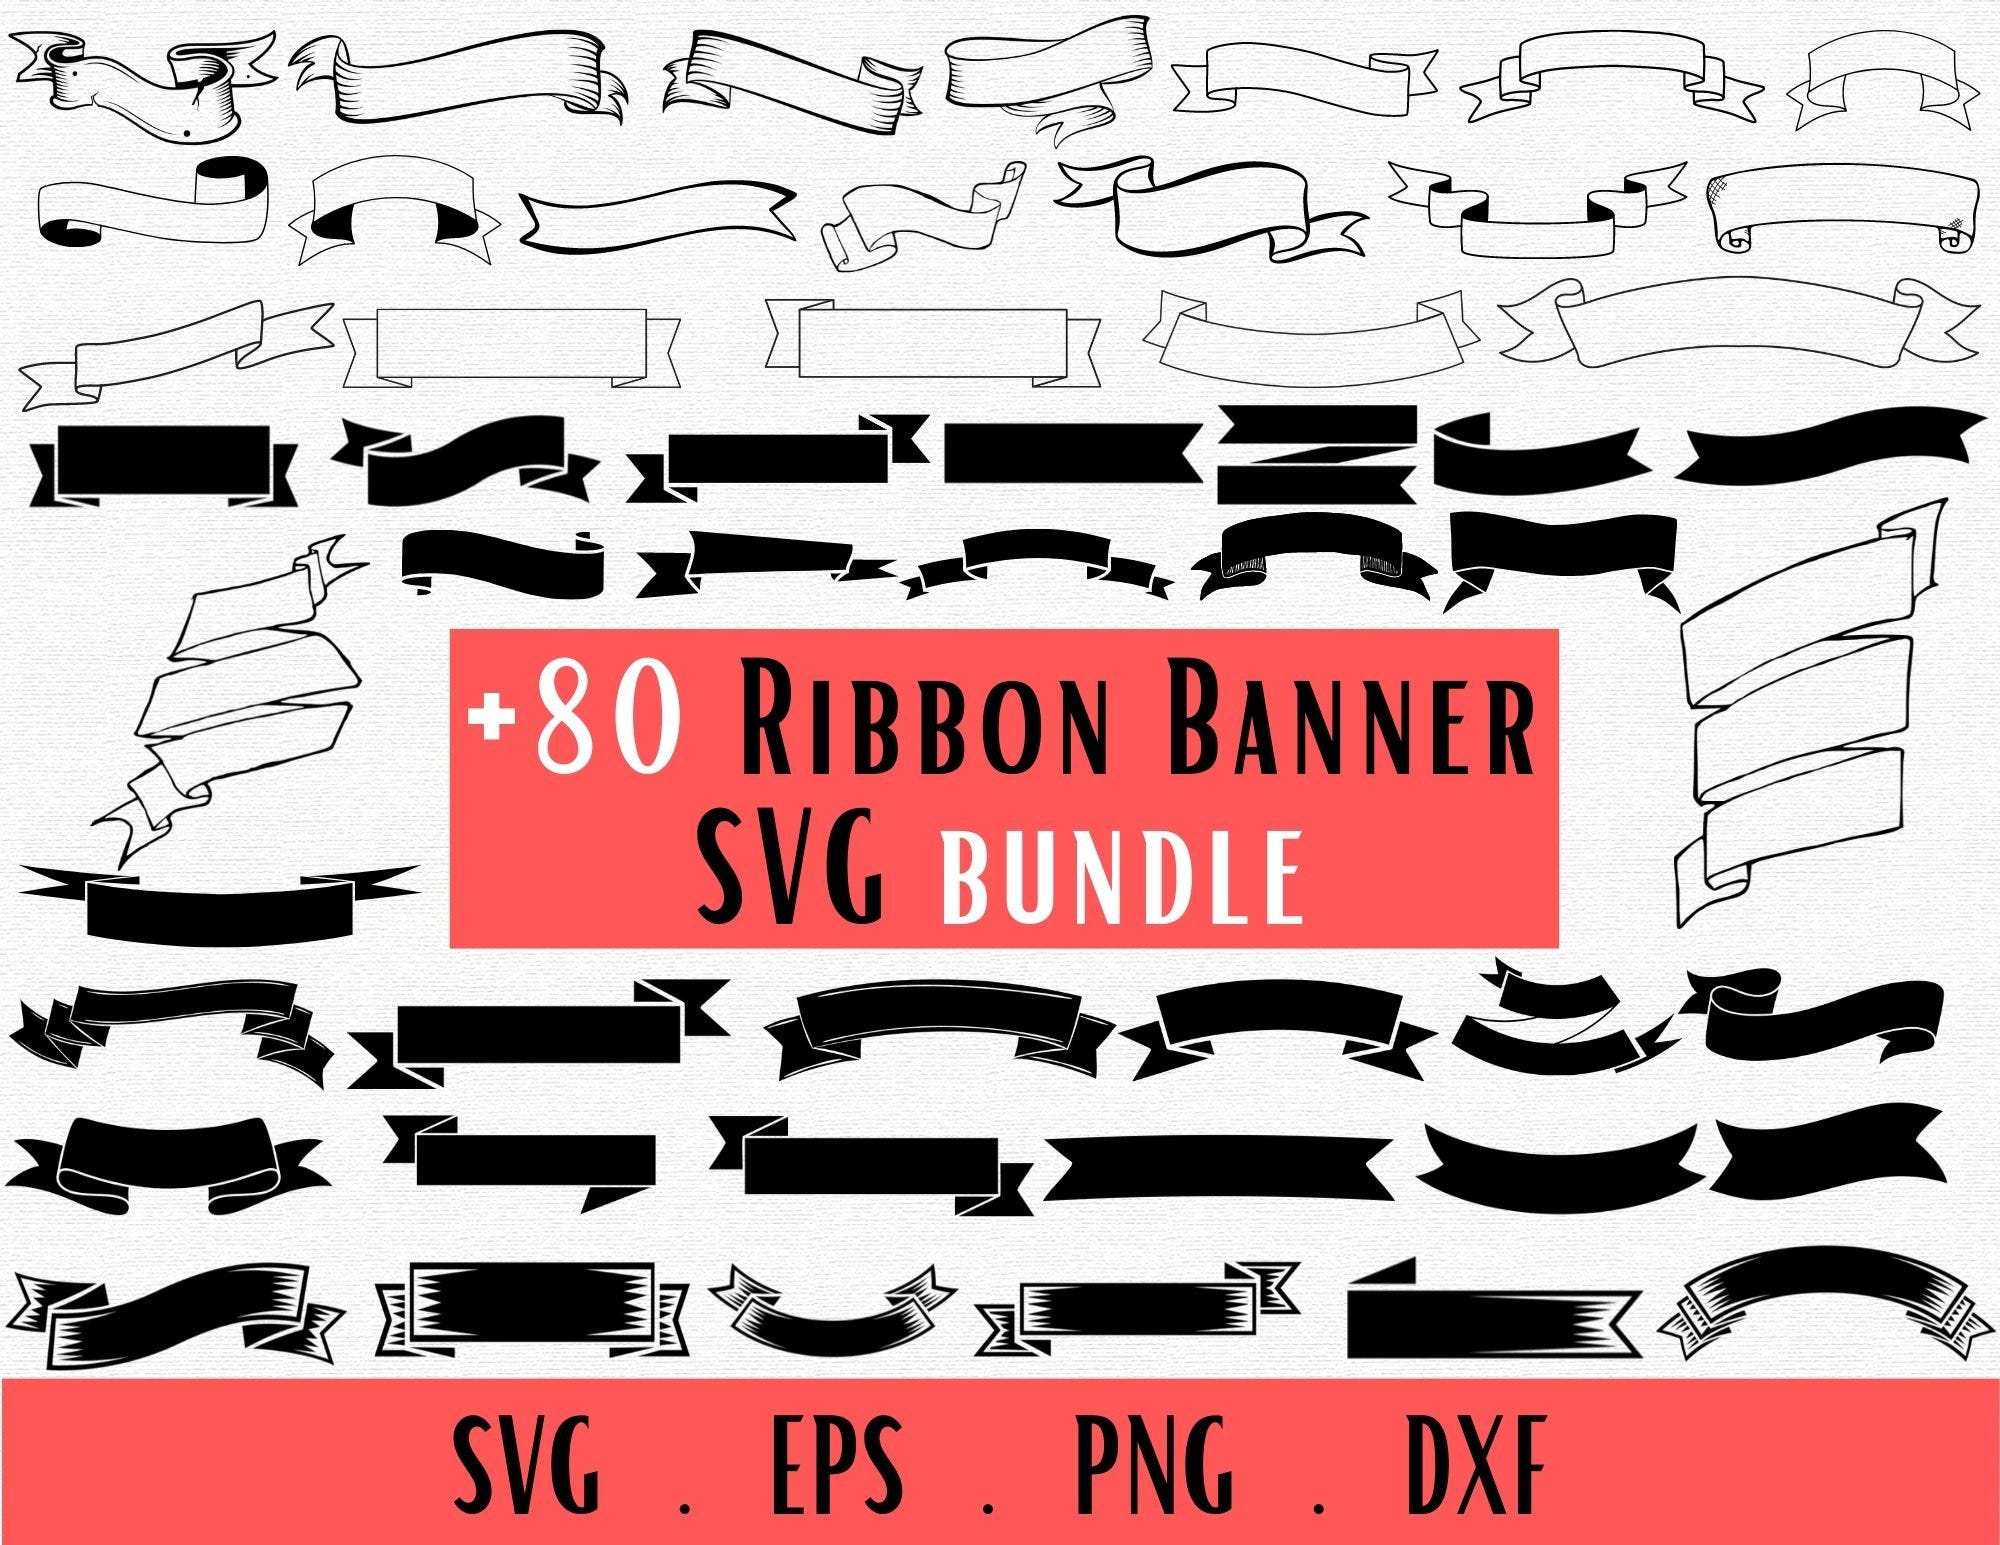 Ribbon Banner Svg, Banner Vector svg, Ribbon clipart, Birthday banner svg, for Cricut & Silhouette, Banner outline Cut File, Banners clipart